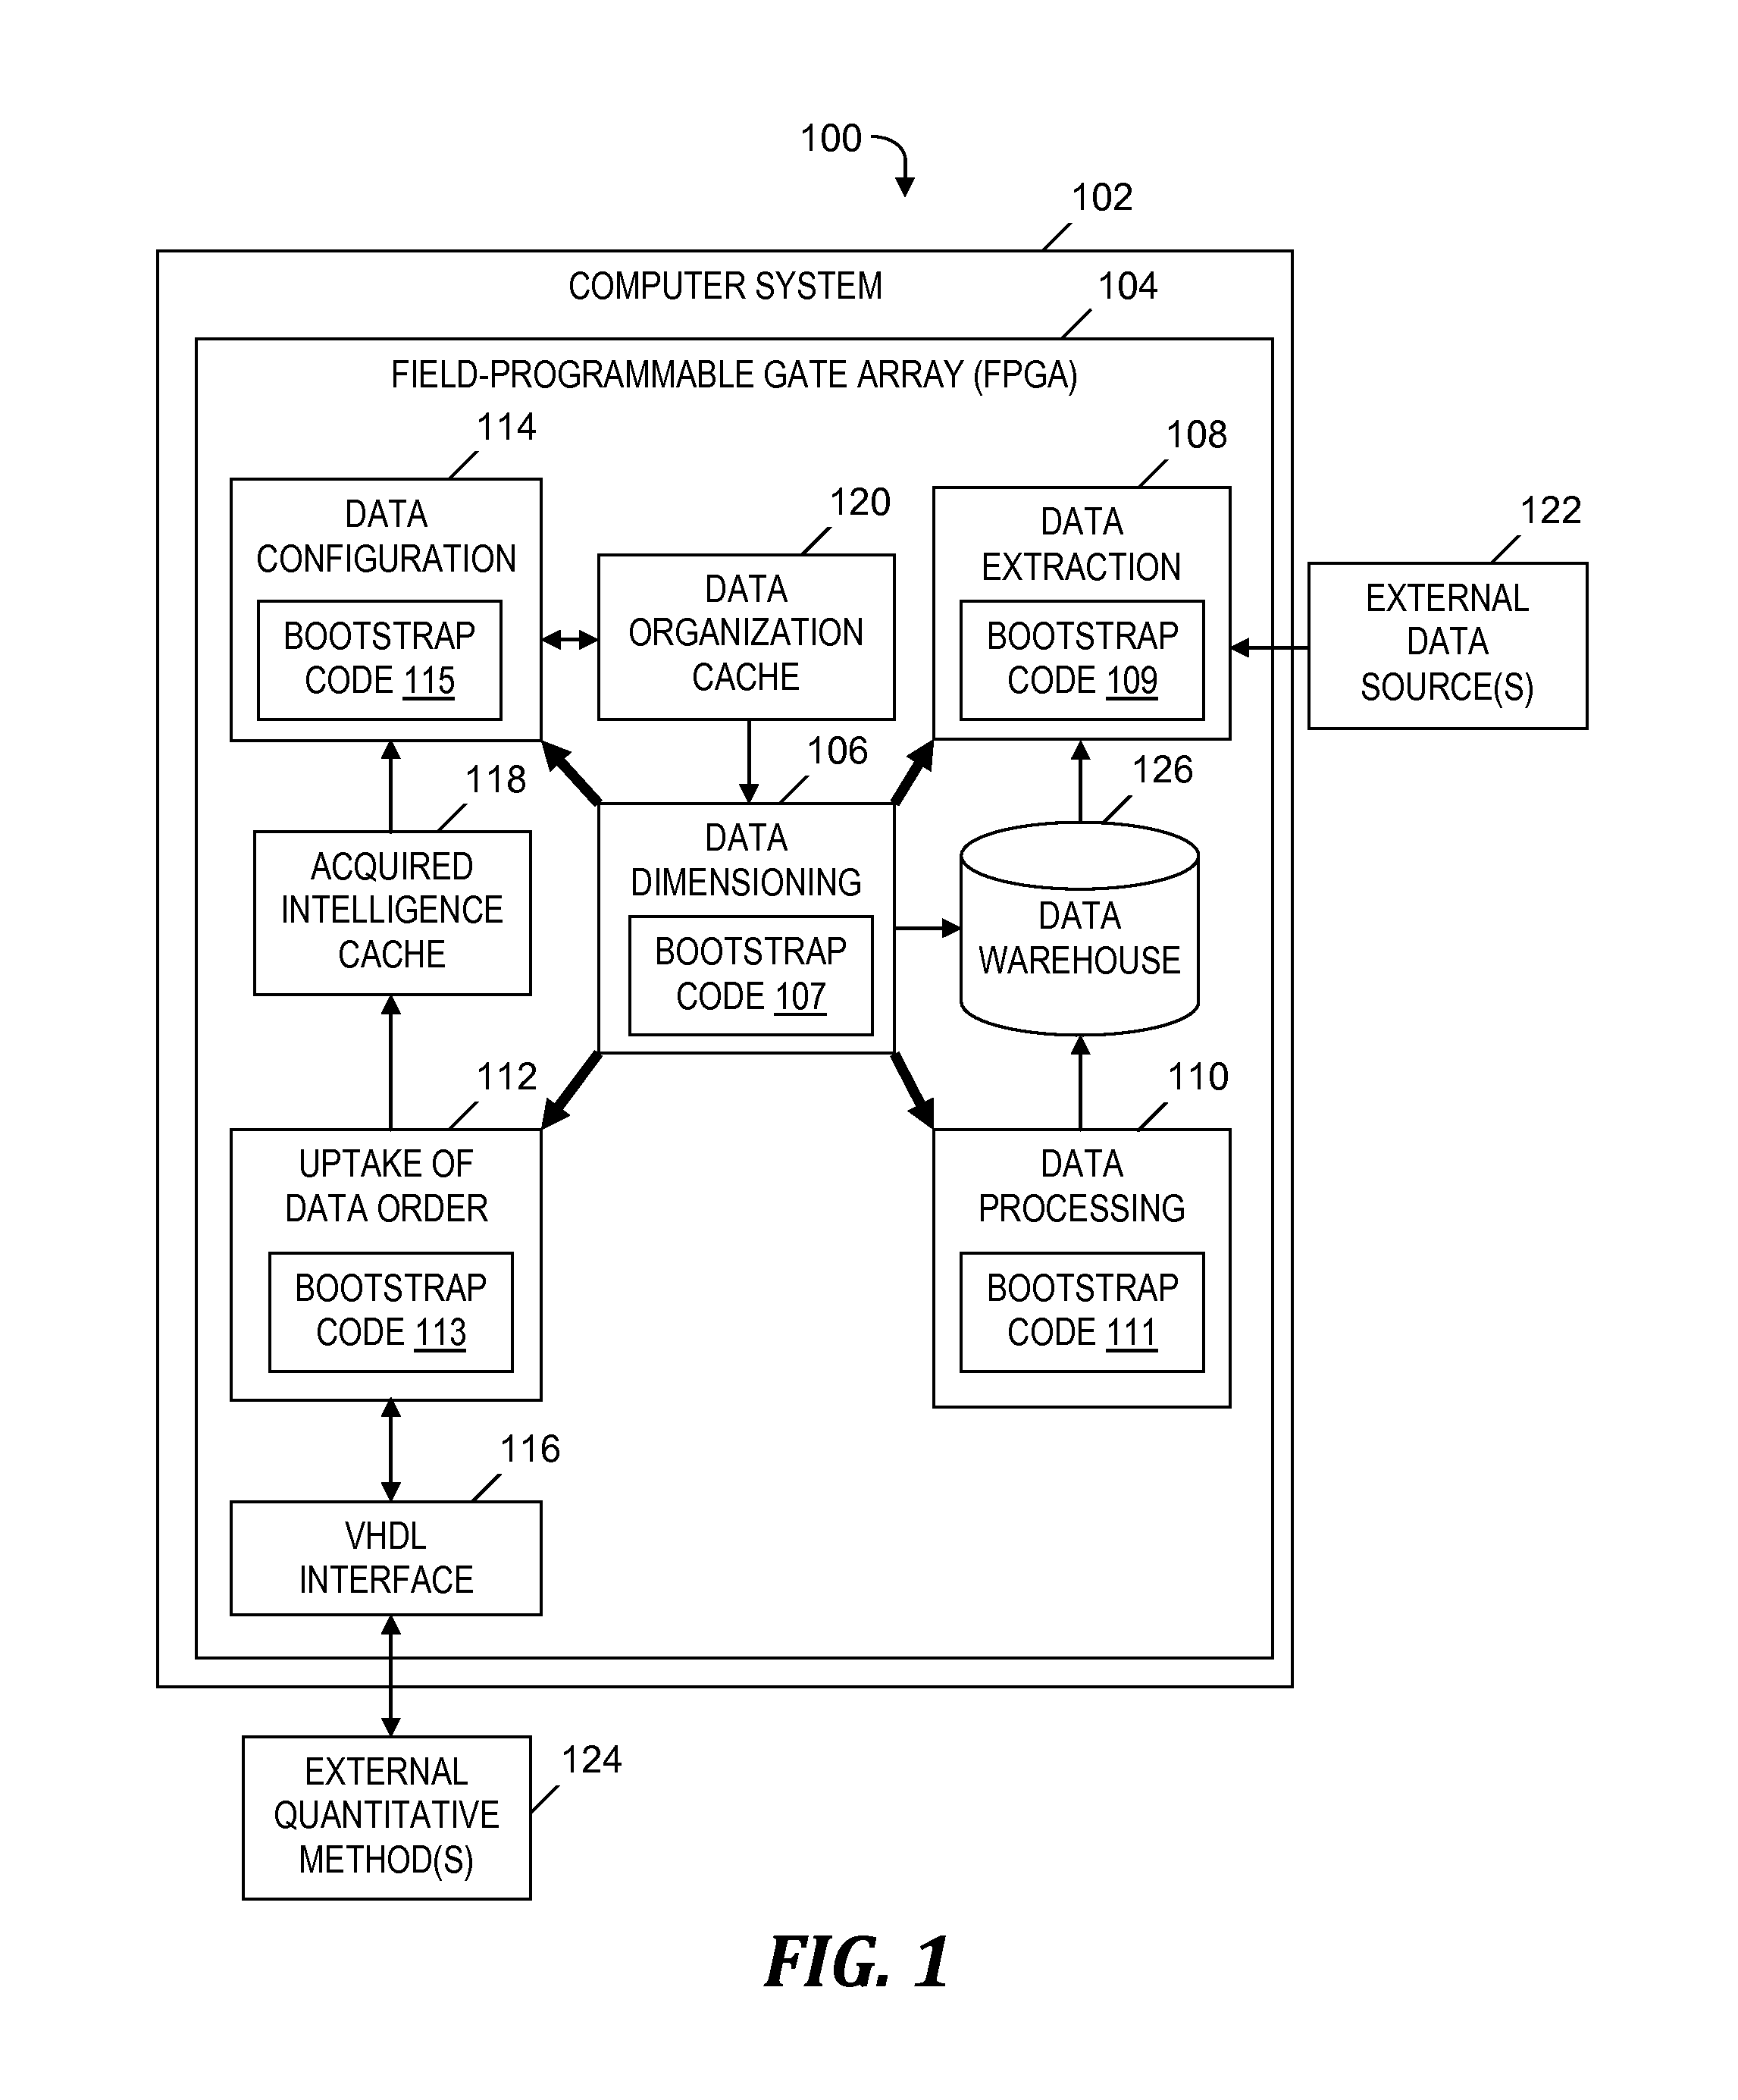 Dynamic Data Dimensioning by Partial Reconfiguration of Single or Multiple Field-Programmable Gate Arrays Using Bootstraps